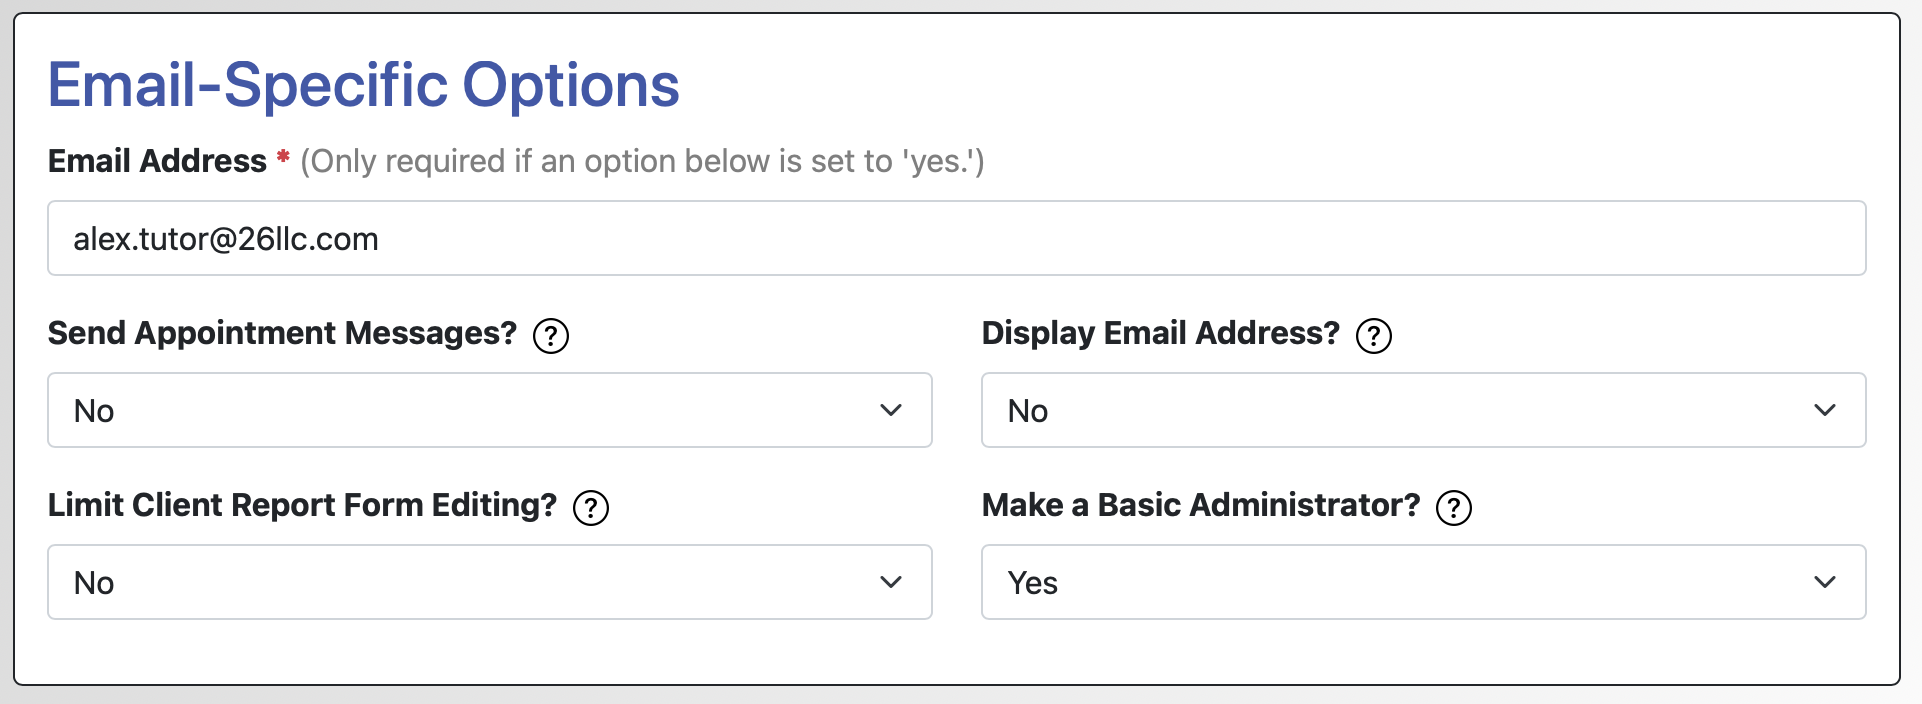 Email-Specific Options